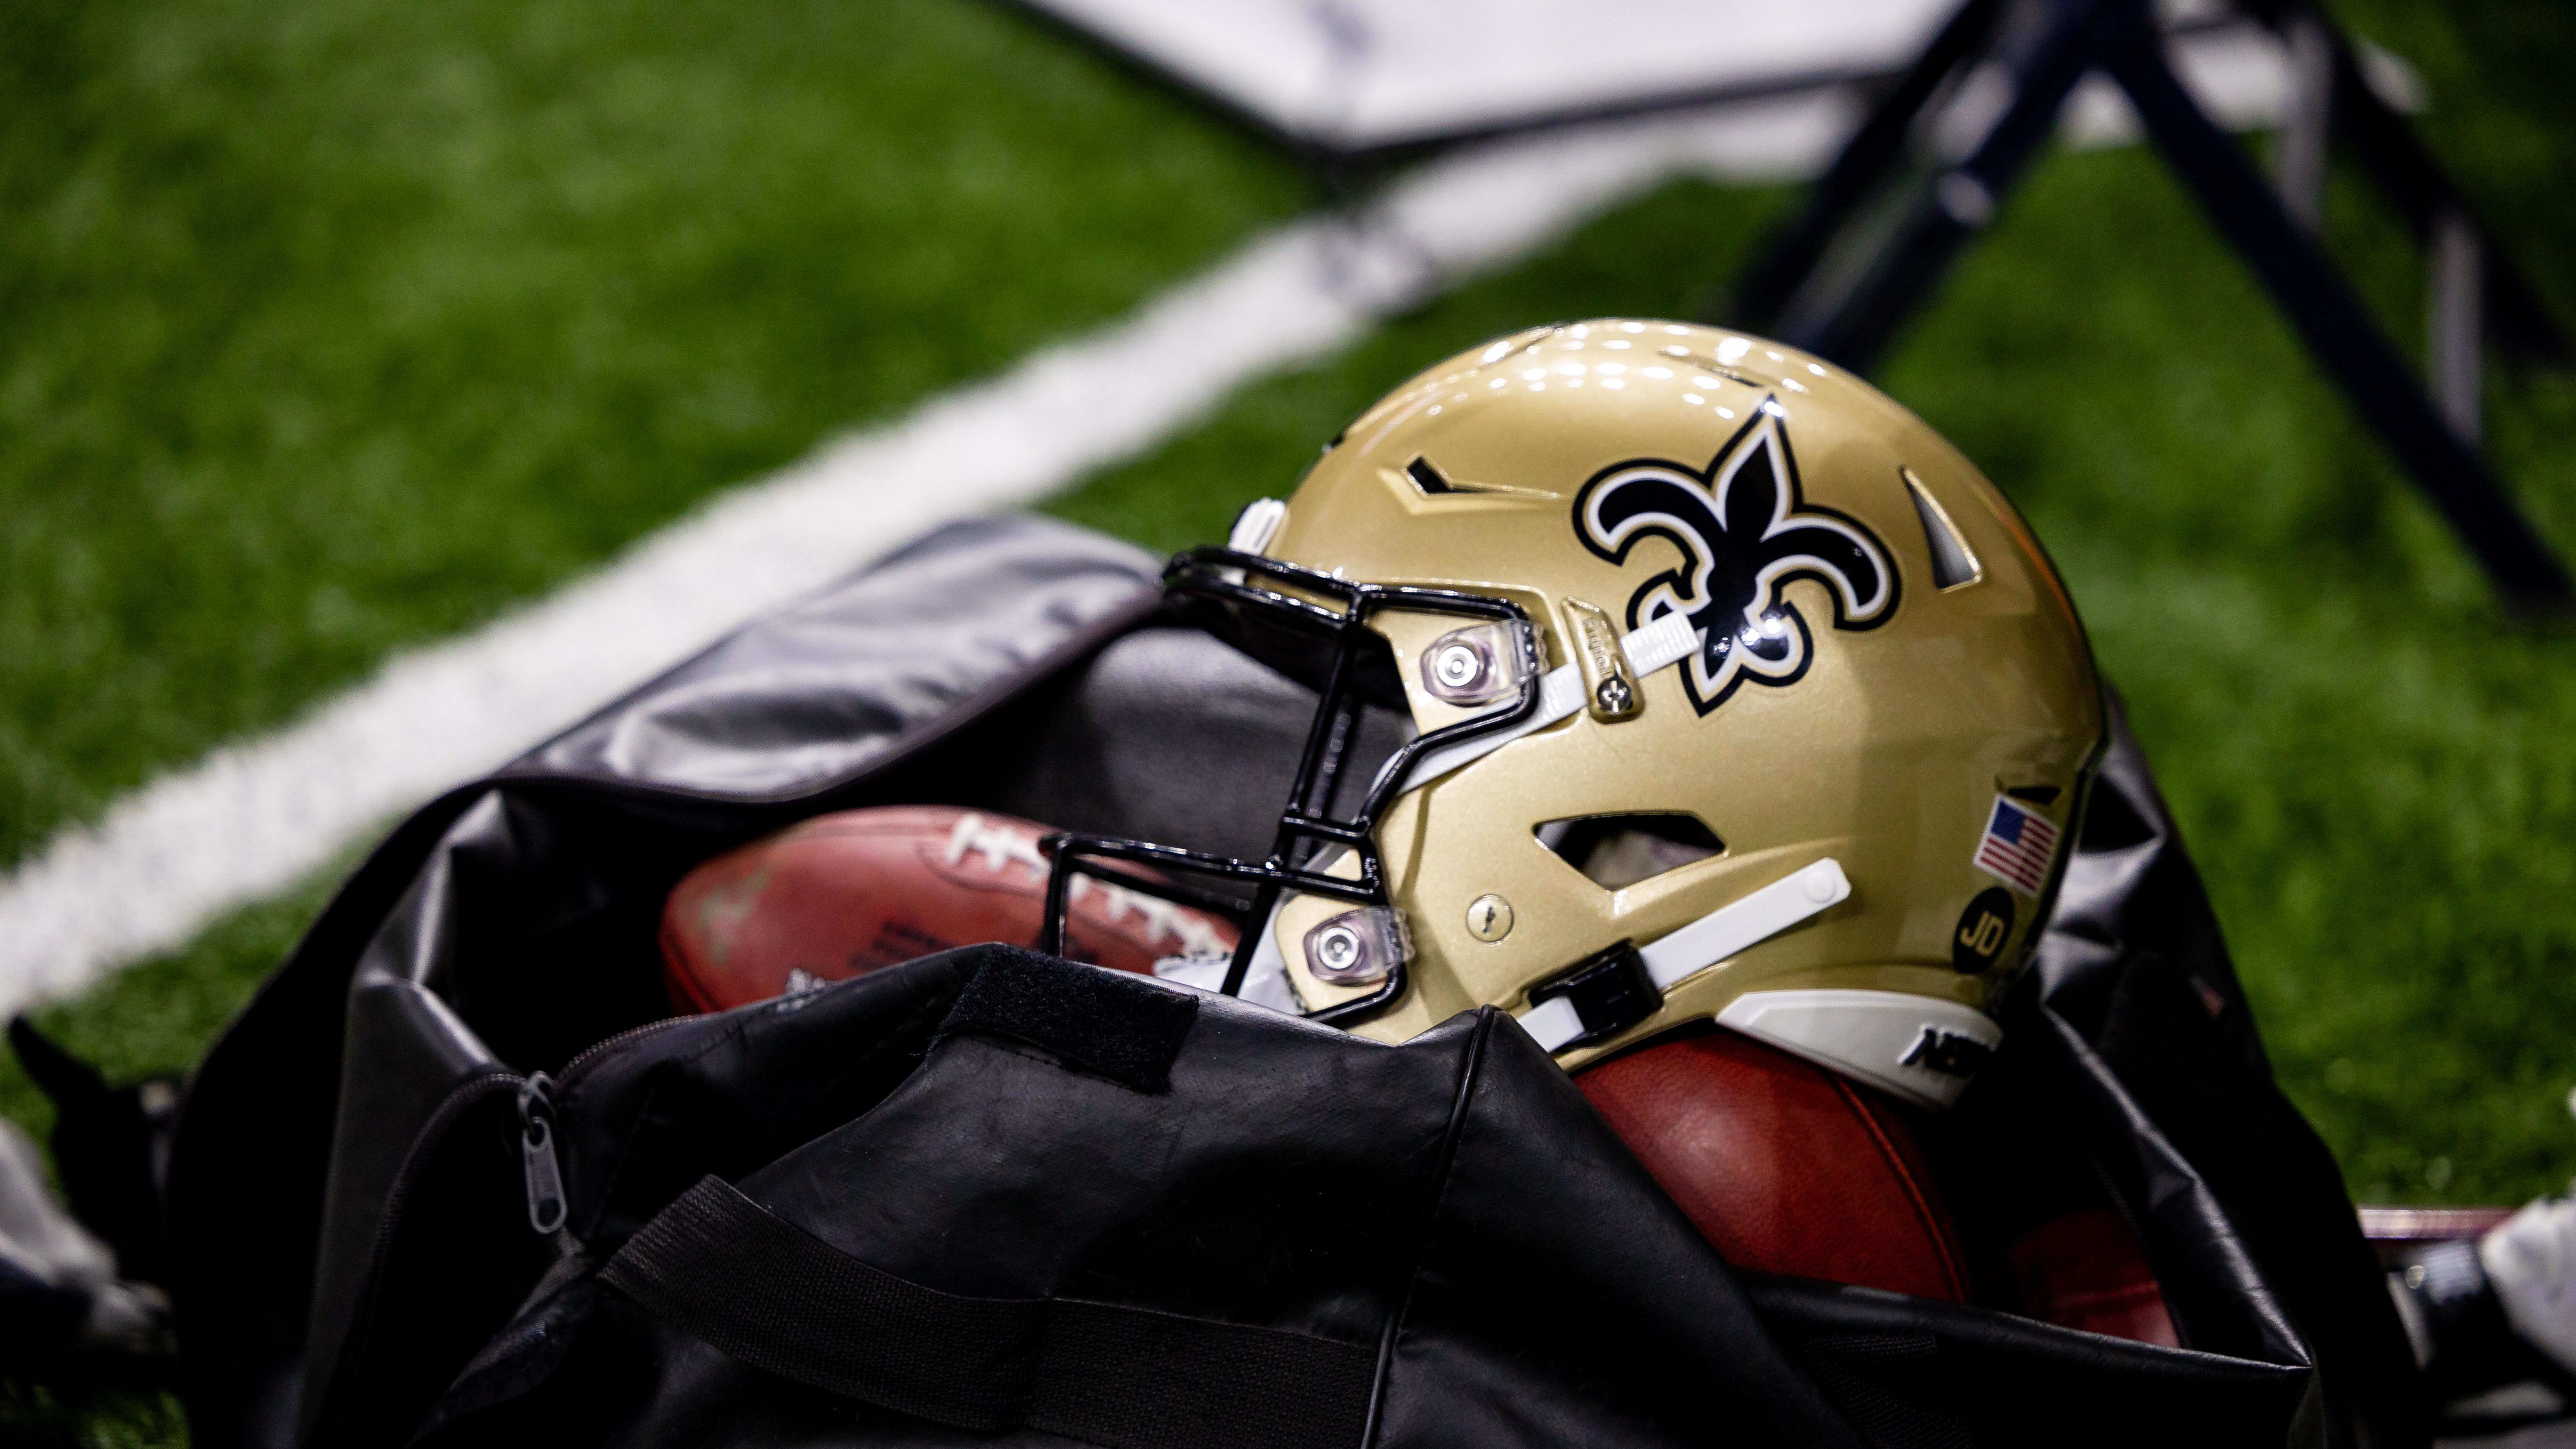 Detailed view of the New Orleans Saints helmet and footballs.